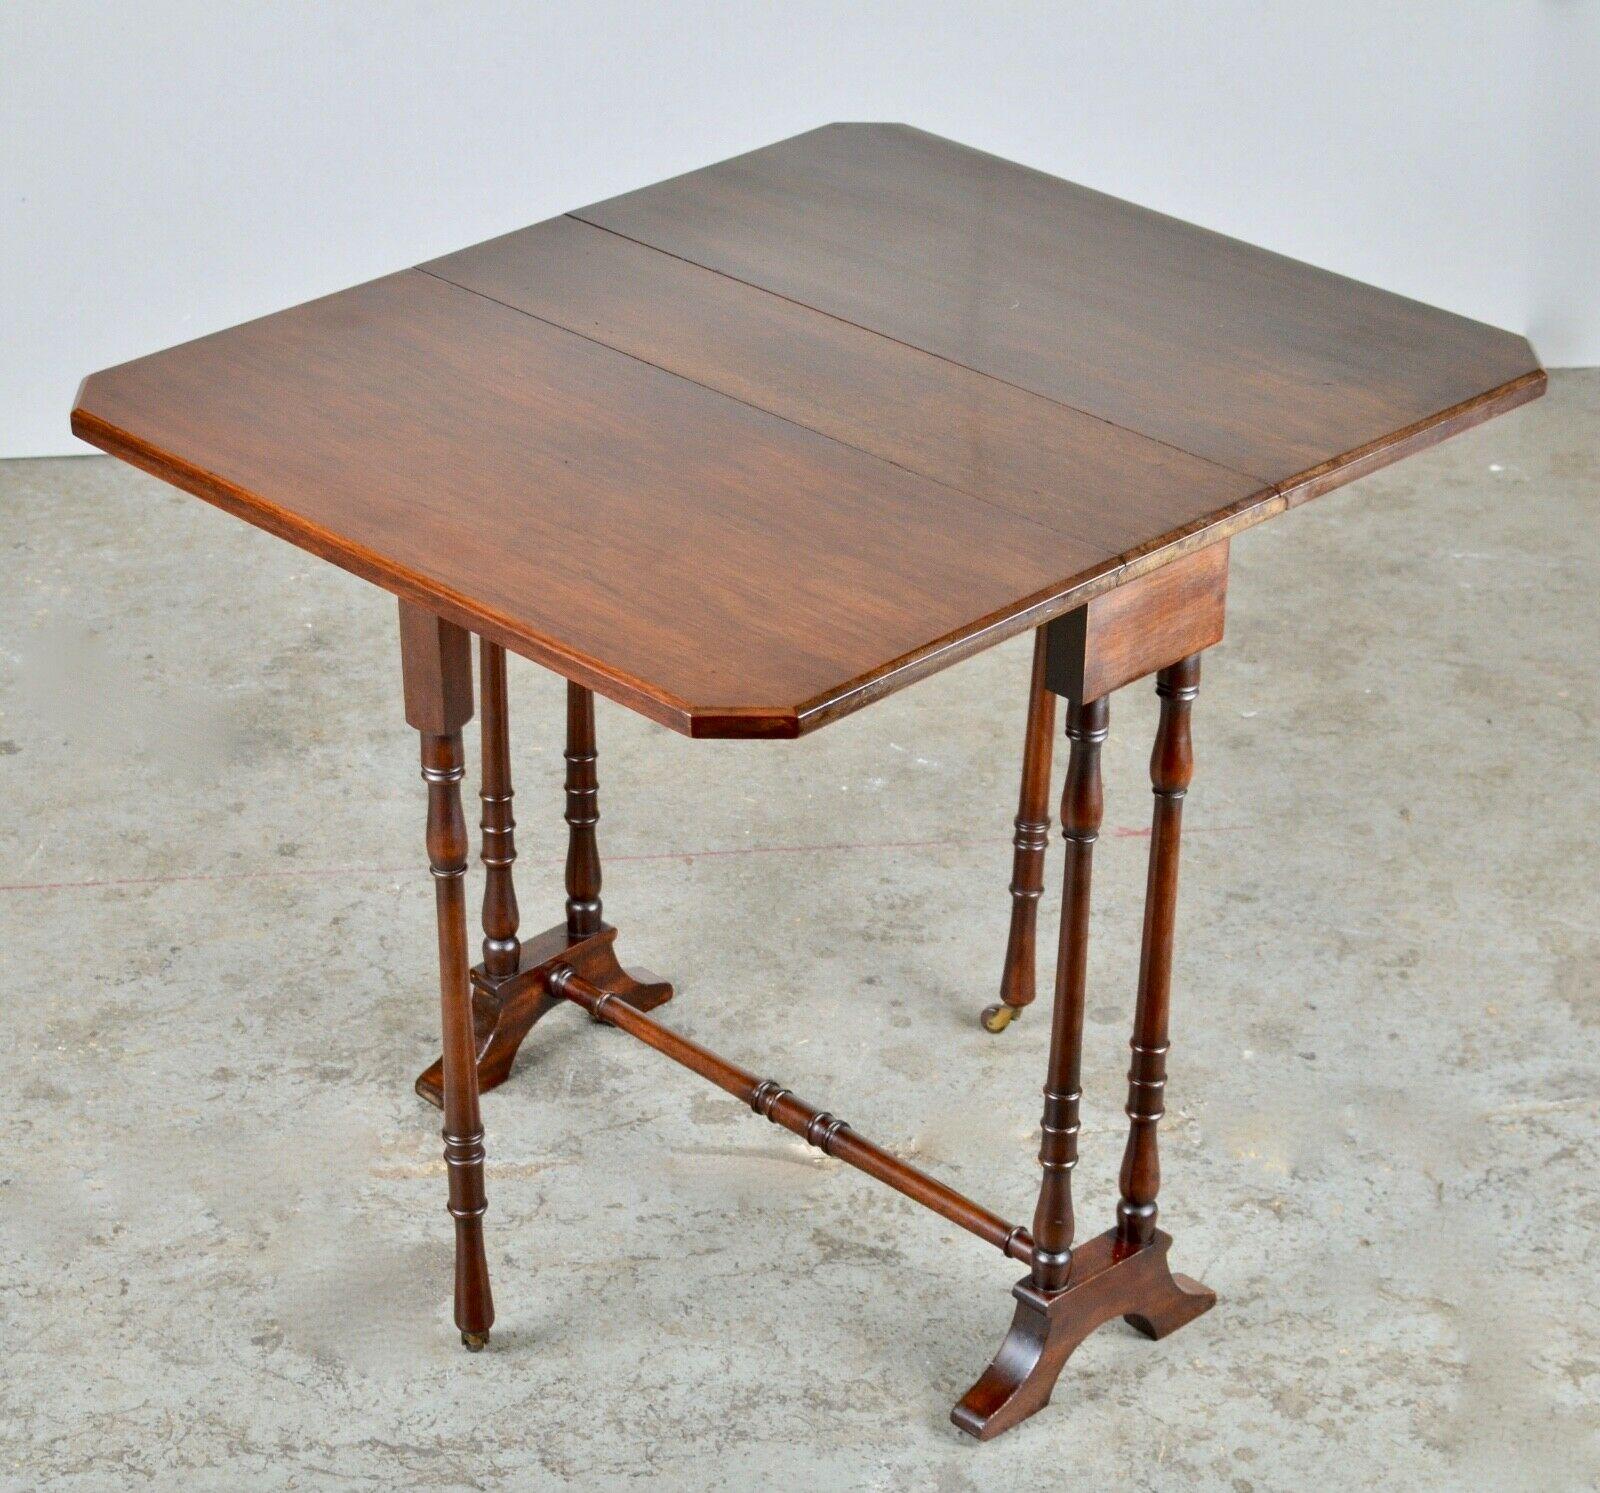 We are delighted to offer for sale this Edwardian walnut drop leaf sutherland occasional table. This table would be ideal for small places with canted corners, 
slightly turned supports, and stretchers with castors on extended legs. The table is in